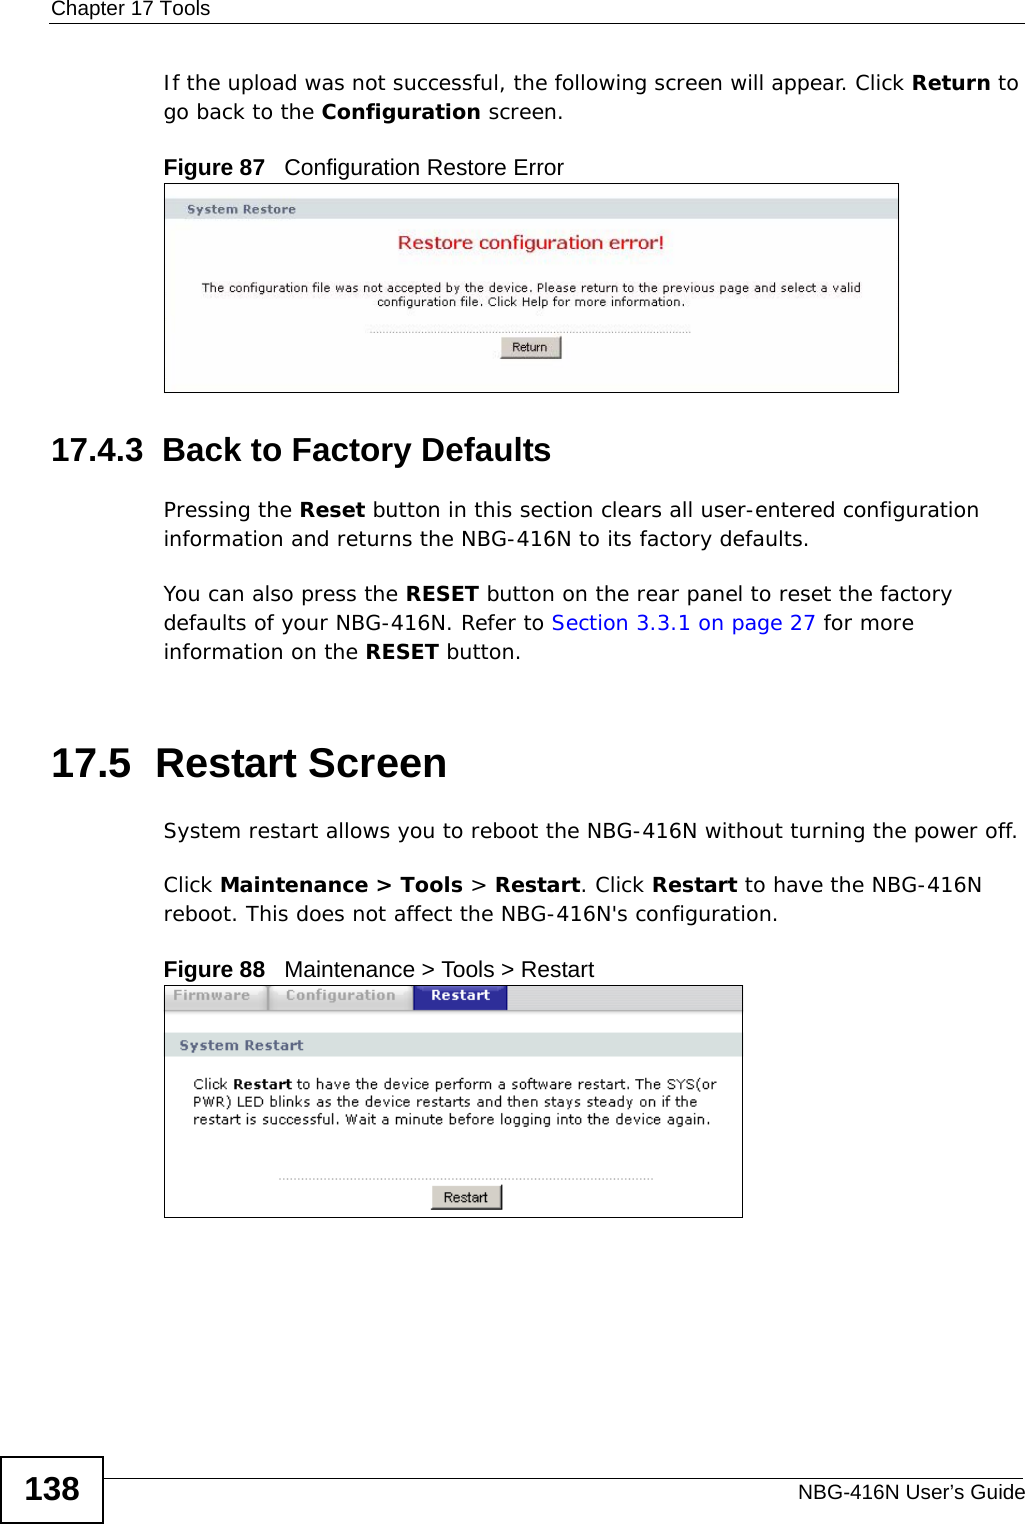 Chapter 17 ToolsNBG-416N User’s Guide138If the upload was not successful, the following screen will appear. Click Return to go back to the Configuration screen.Figure 87   Configuration Restore Error17.4.3  Back to Factory DefaultsPressing the Reset button in this section clears all user-entered configuration information and returns the NBG-416N to its factory defaults.You can also press the RESET button on the rear panel to reset the factory defaults of your NBG-416N. Refer to Section 3.3.1 on page 27 for more information on the RESET button.17.5  Restart ScreenSystem restart allows you to reboot the NBG-416N without turning the power off. Click Maintenance &gt; Tools &gt; Restart. Click Restart to have the NBG-416N reboot. This does not affect the NBG-416N&apos;s configuration.Figure 88   Maintenance &gt; Tools &gt; Restart 